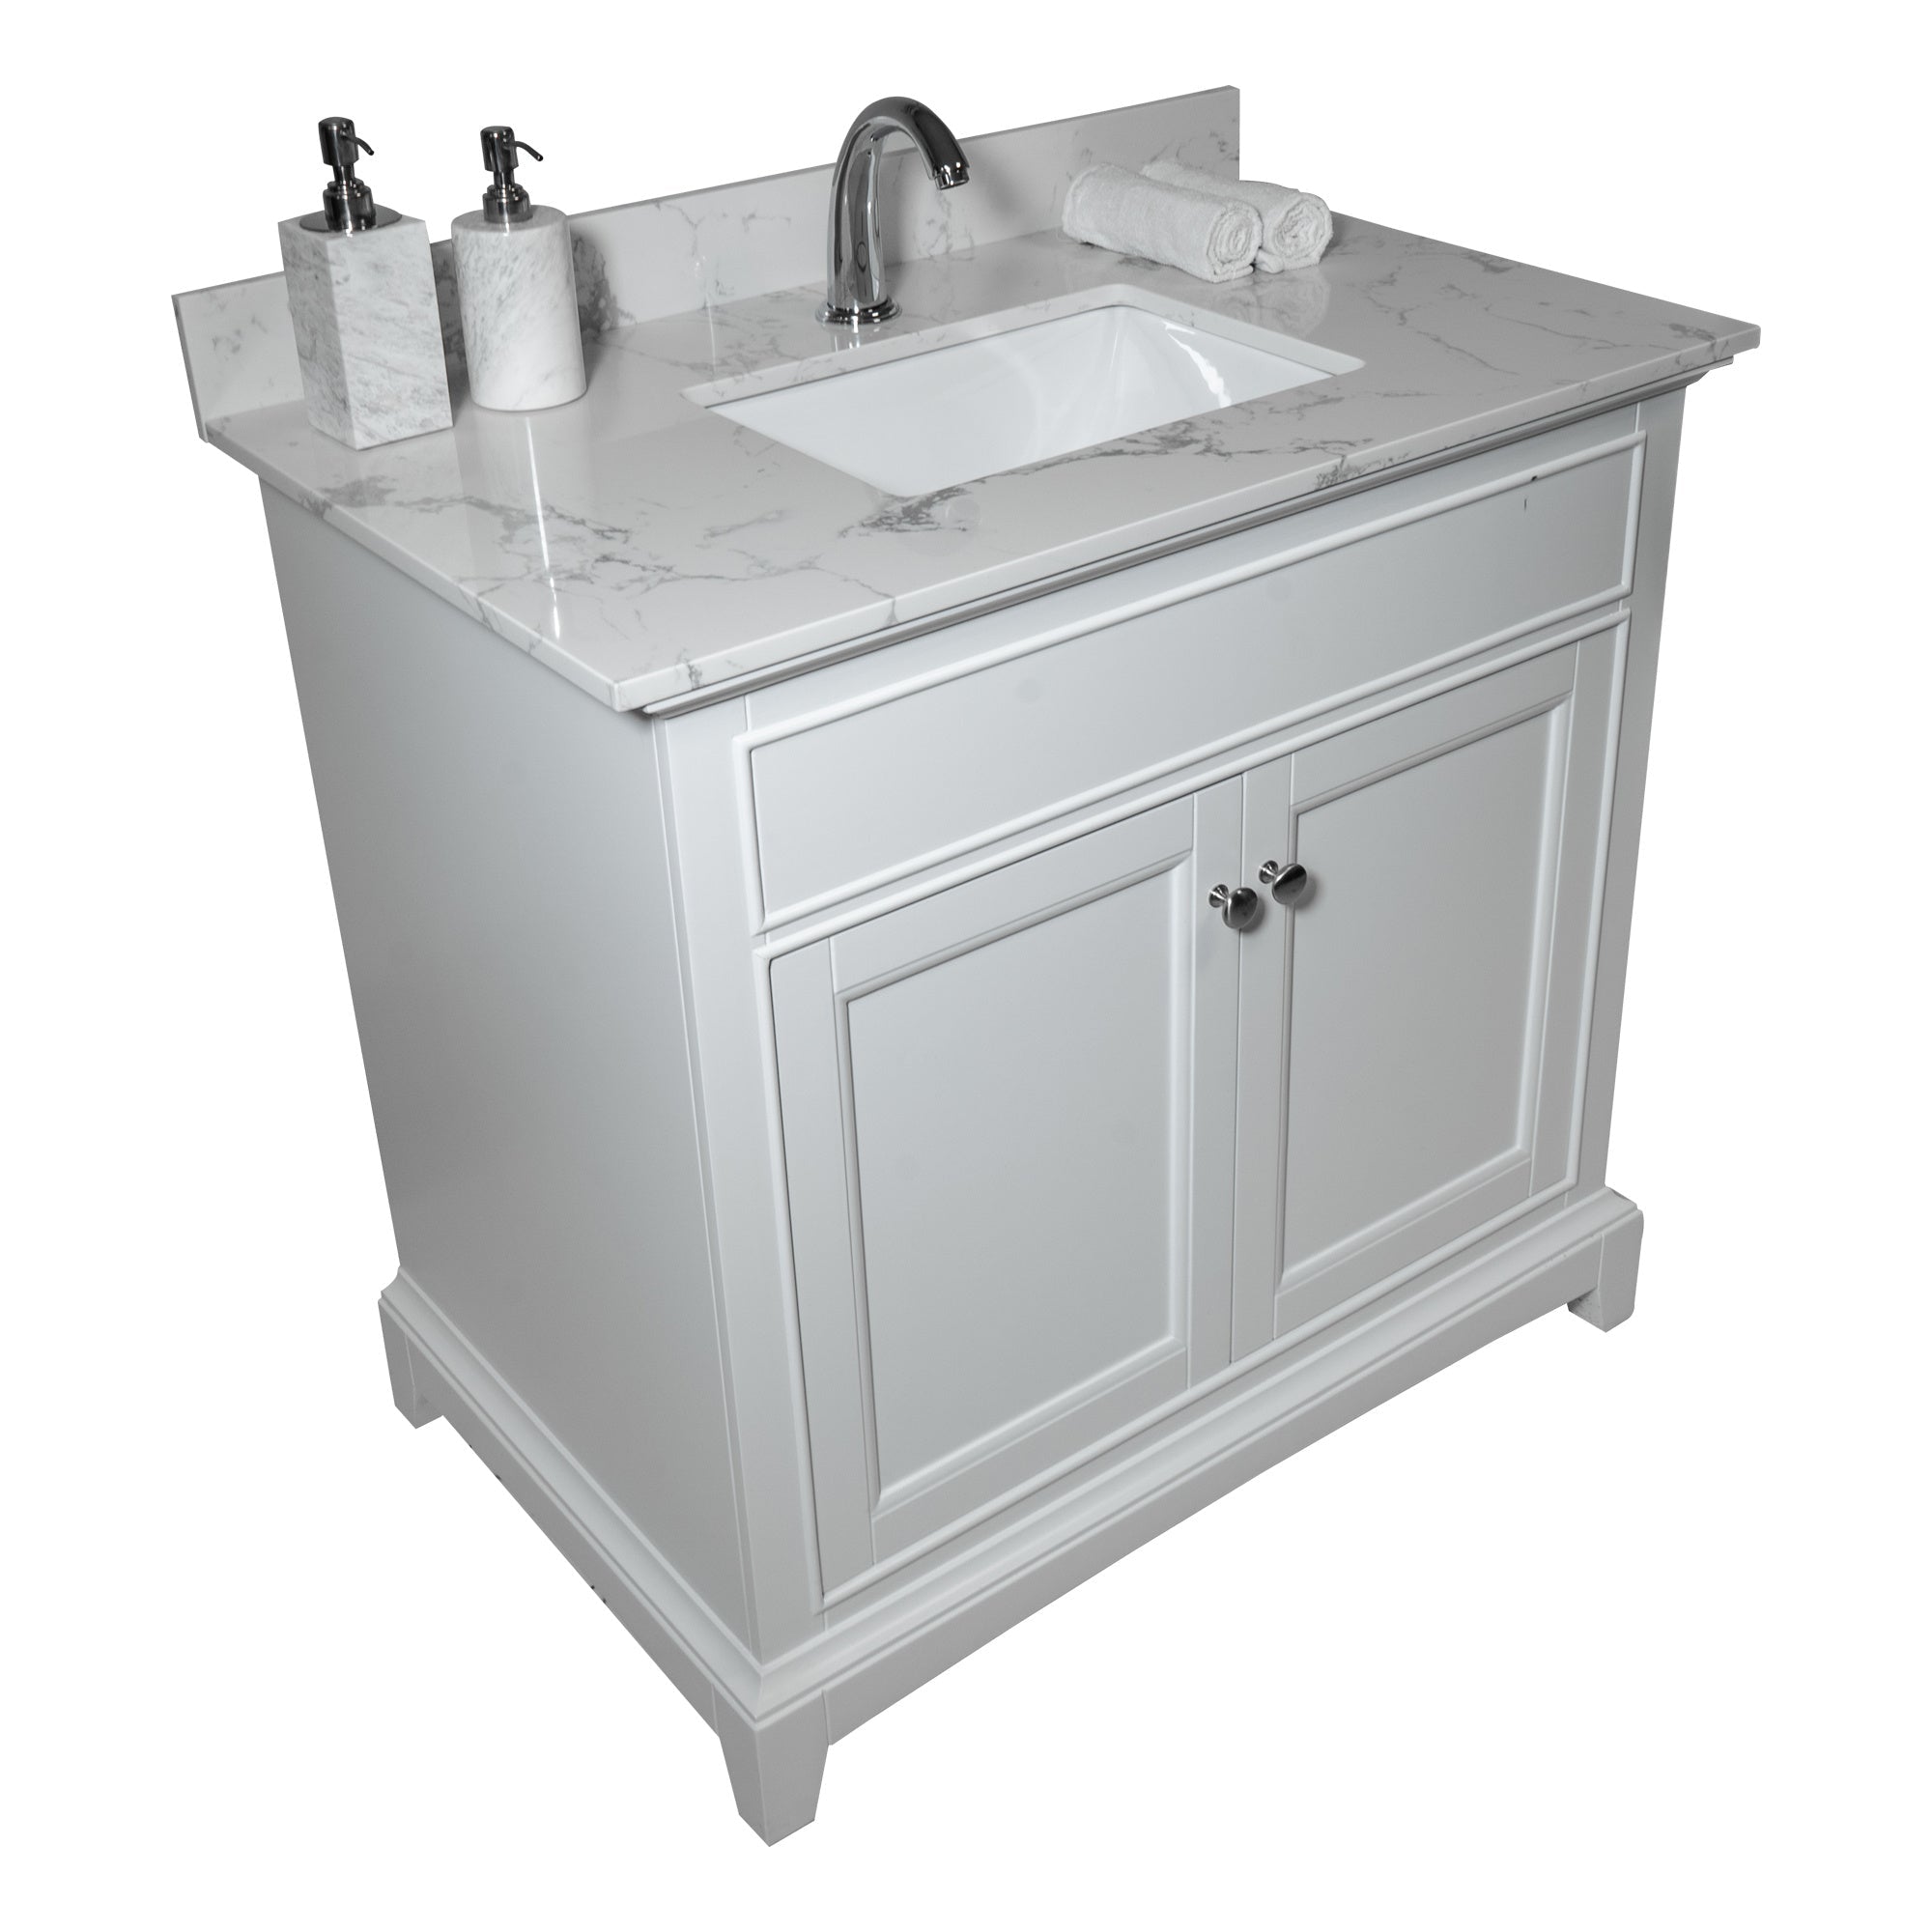 37inch bathroom vanity top stone carrara white new style tops with rectangle undermount ceramic sink and single faucet hole Moorescarts